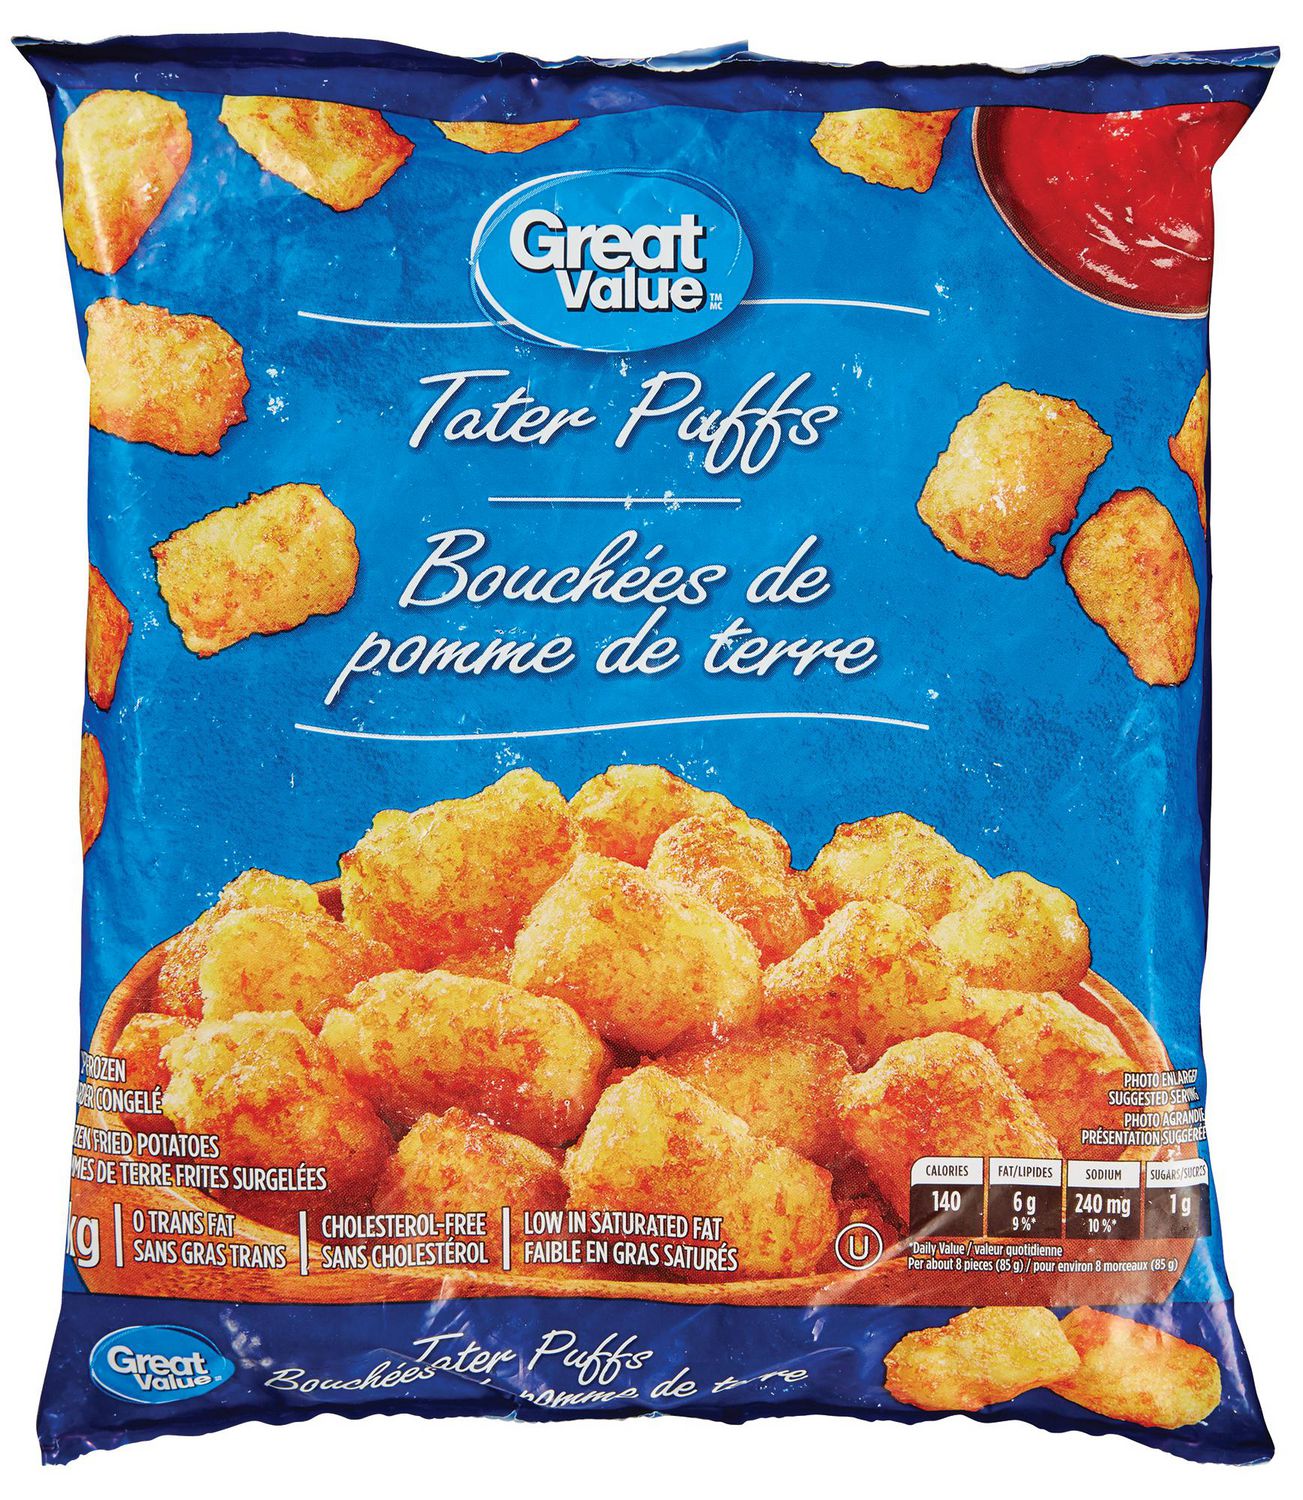 Is tater tots copyrighted